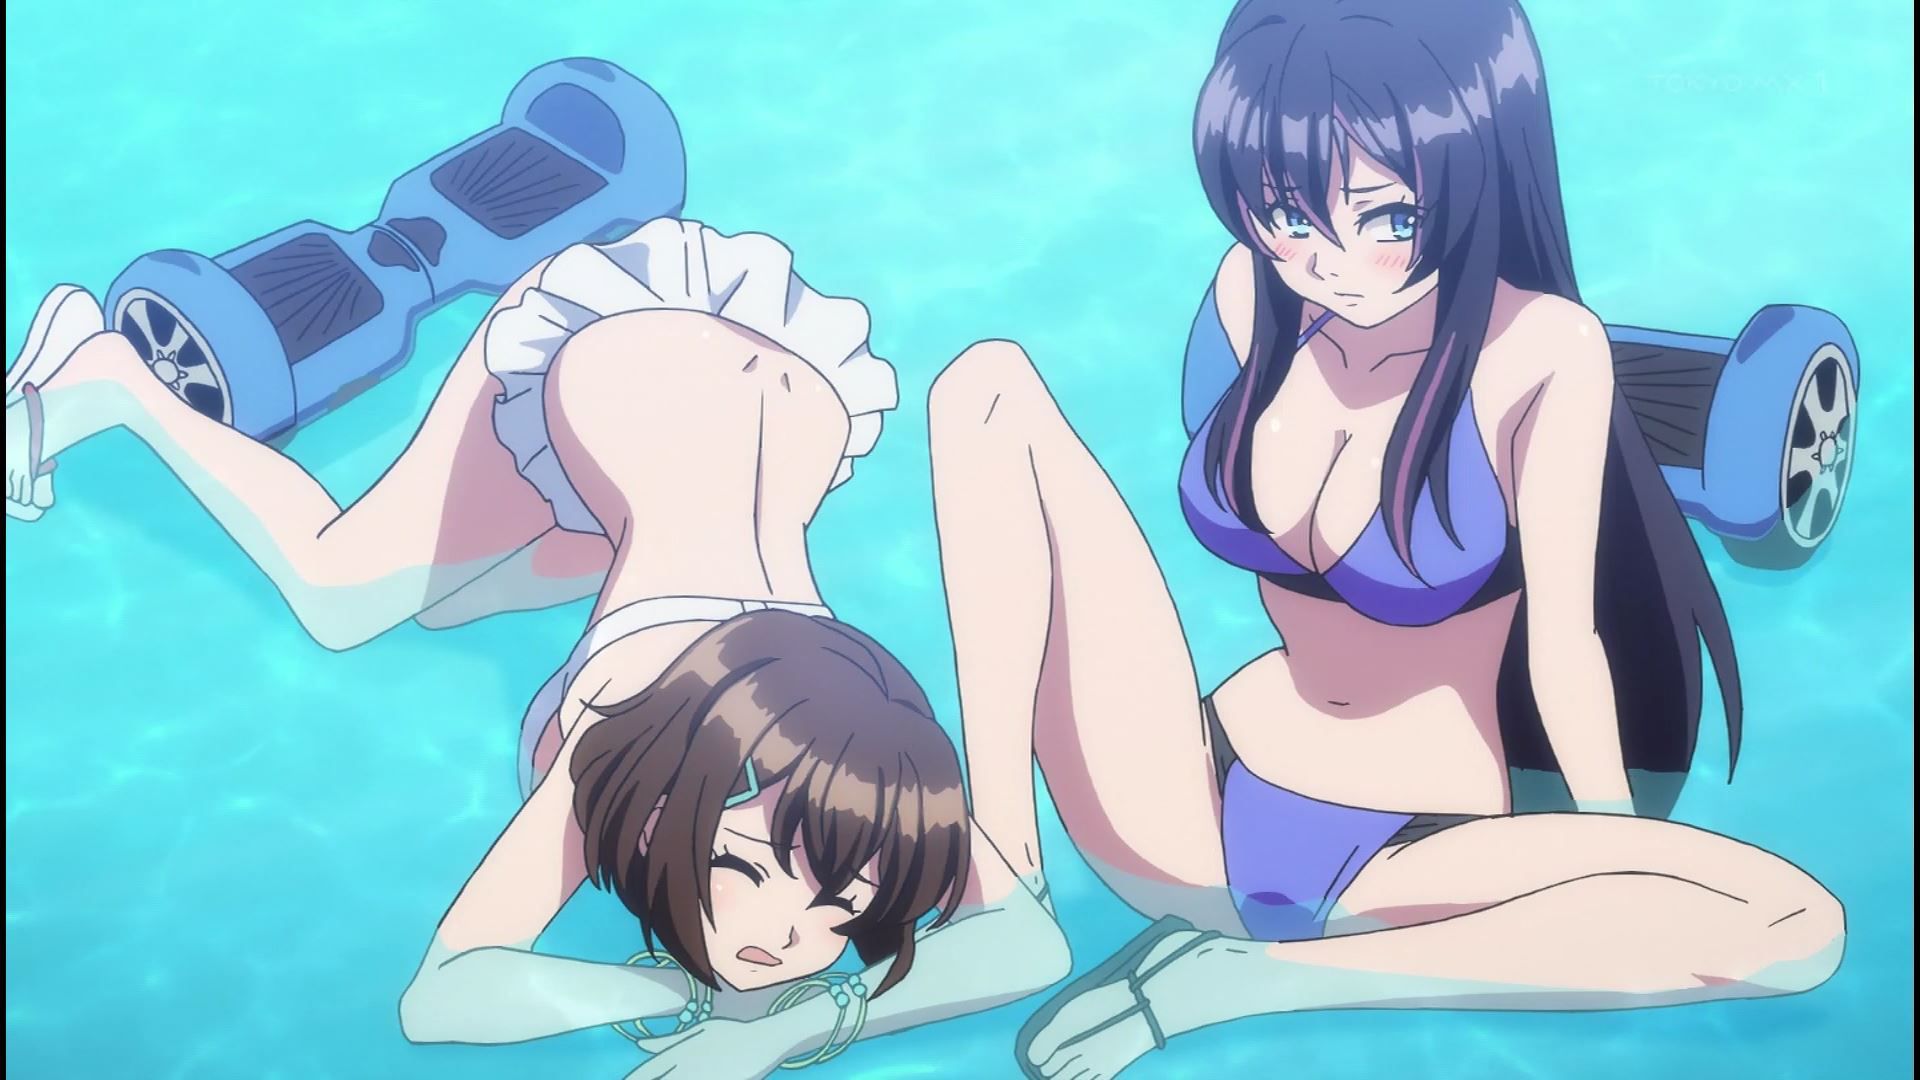 Anime [Kandagawa JETGIRLS] 6 episodes, such as girls' very cute swimsuit and naked! 19